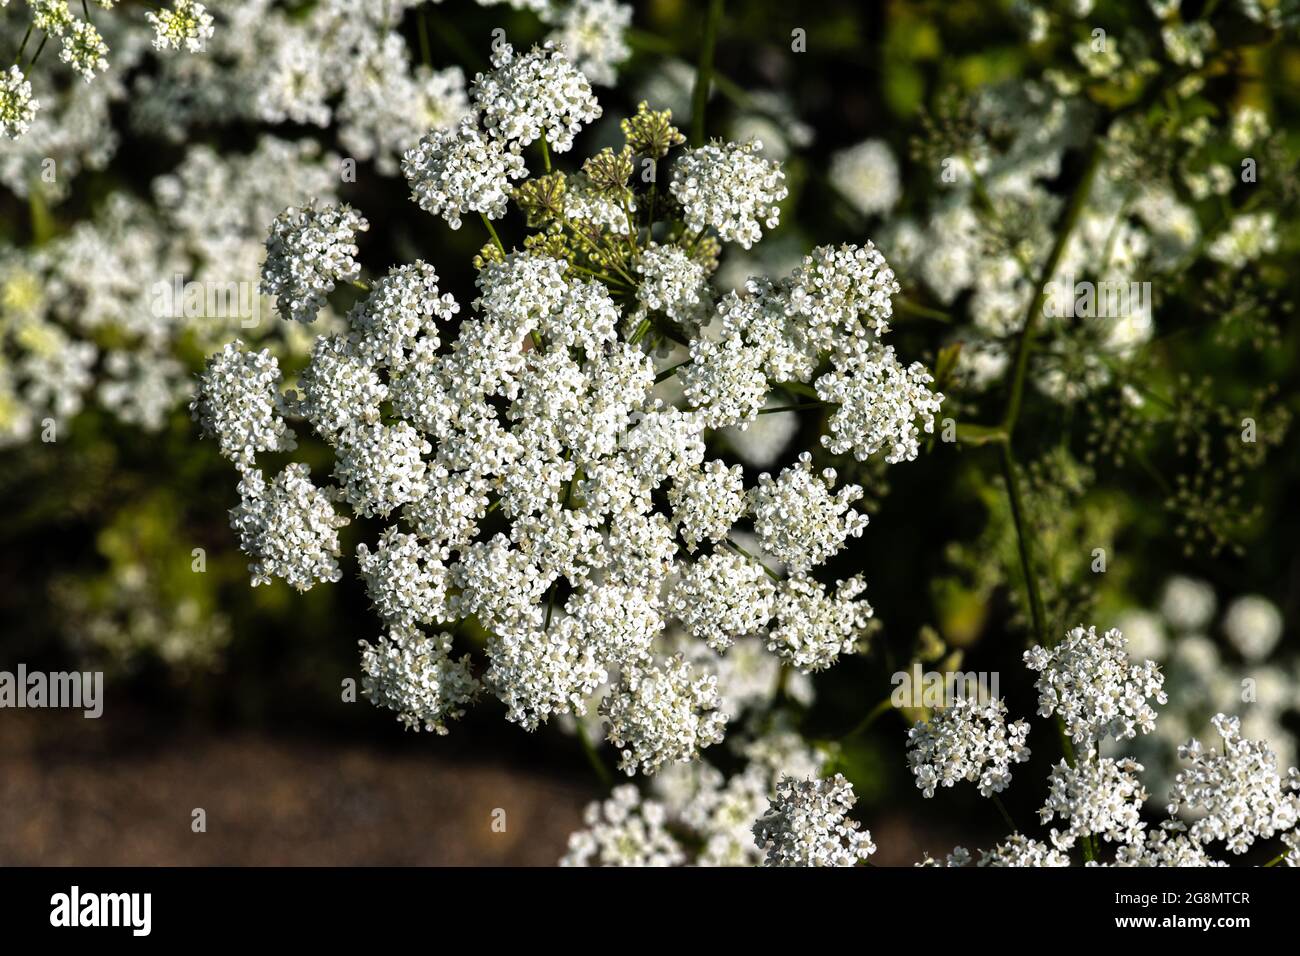 Flowers of Anise, Aniseed or Anix (Pimpinella anisum) Stock Photo